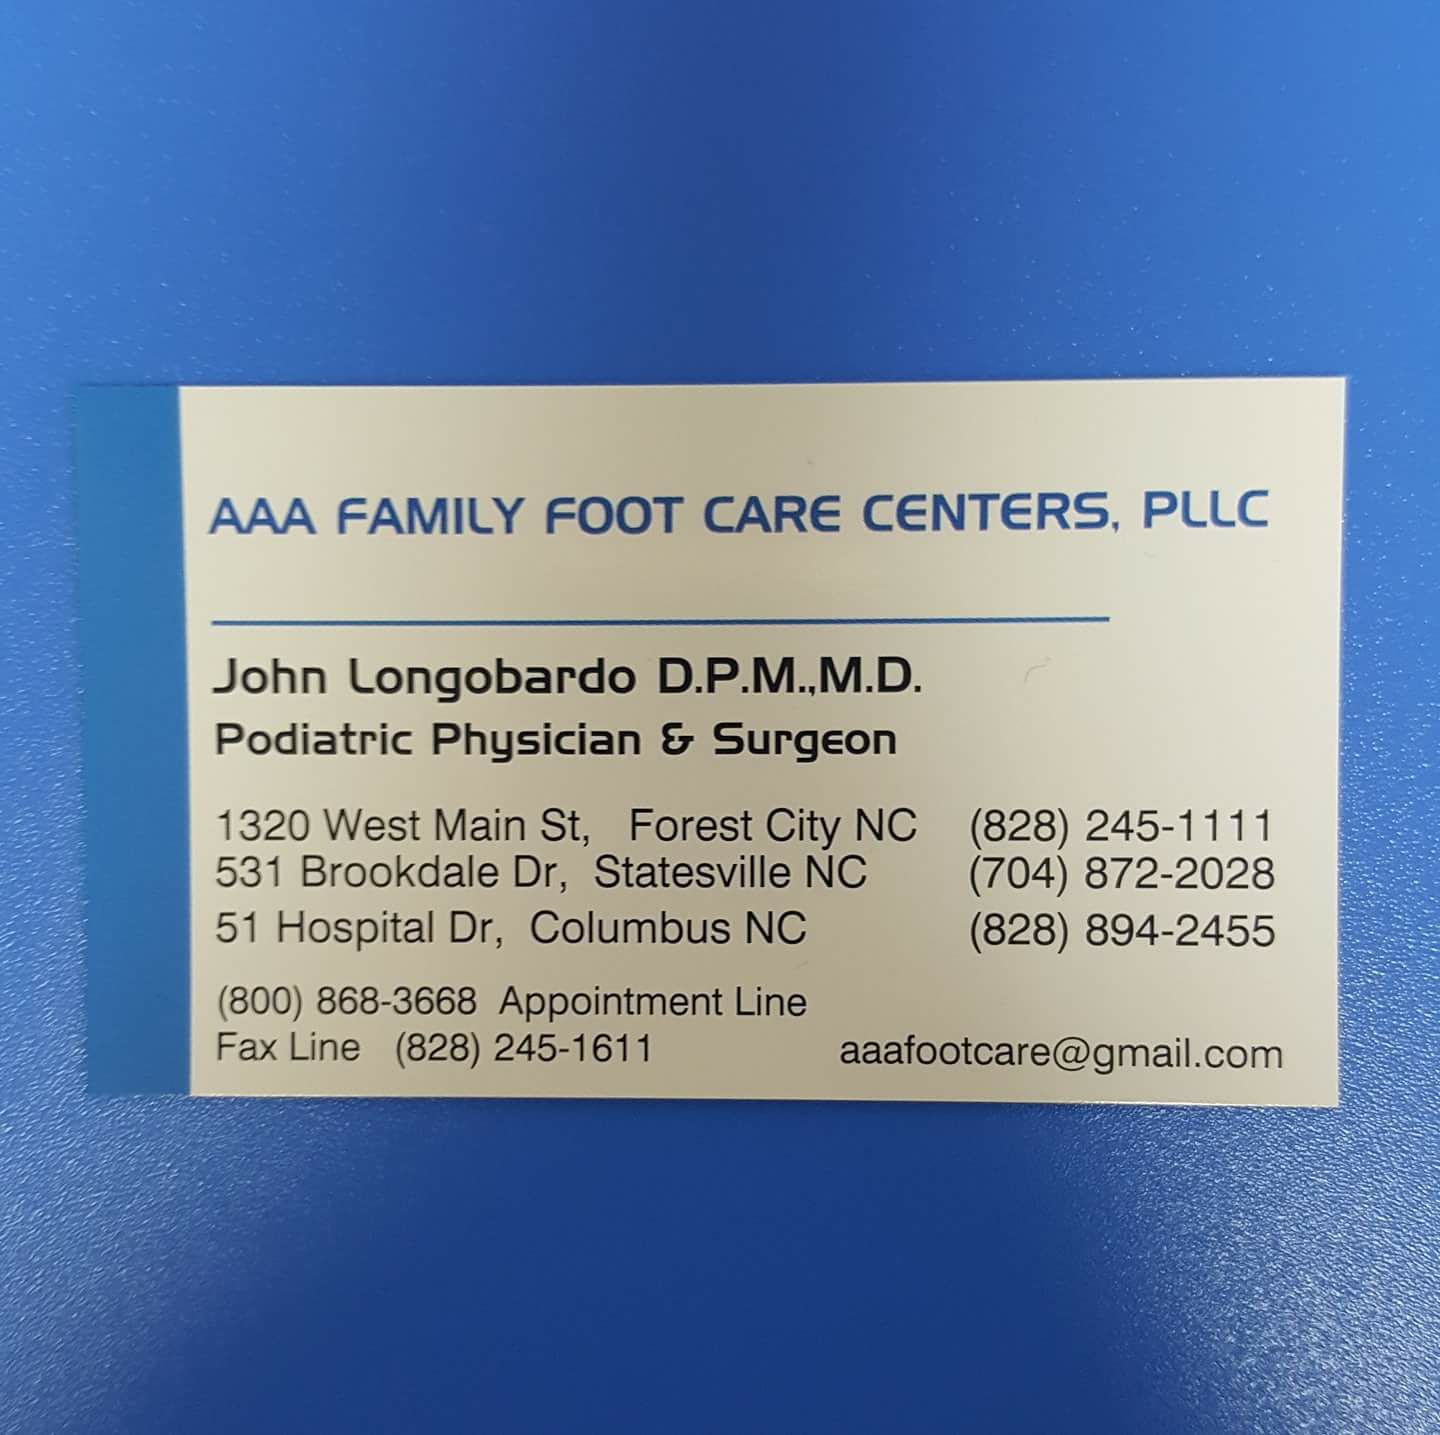 AAA Family Foot Care Center PLLC